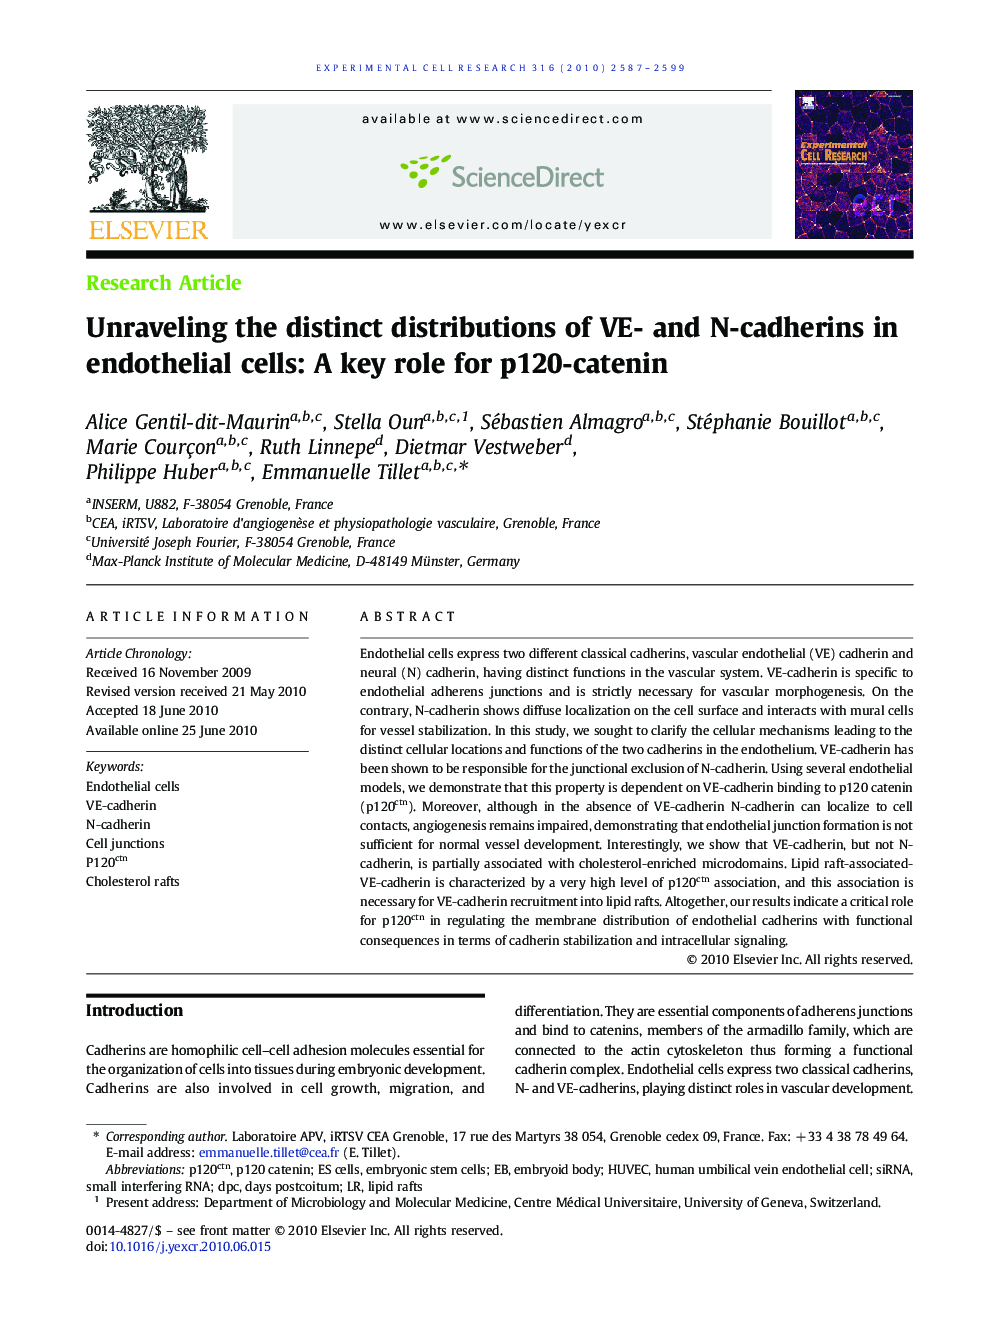 Unraveling the distinct distributions of VE- and N-cadherins in endothelial cells: A key role for p120-catenin